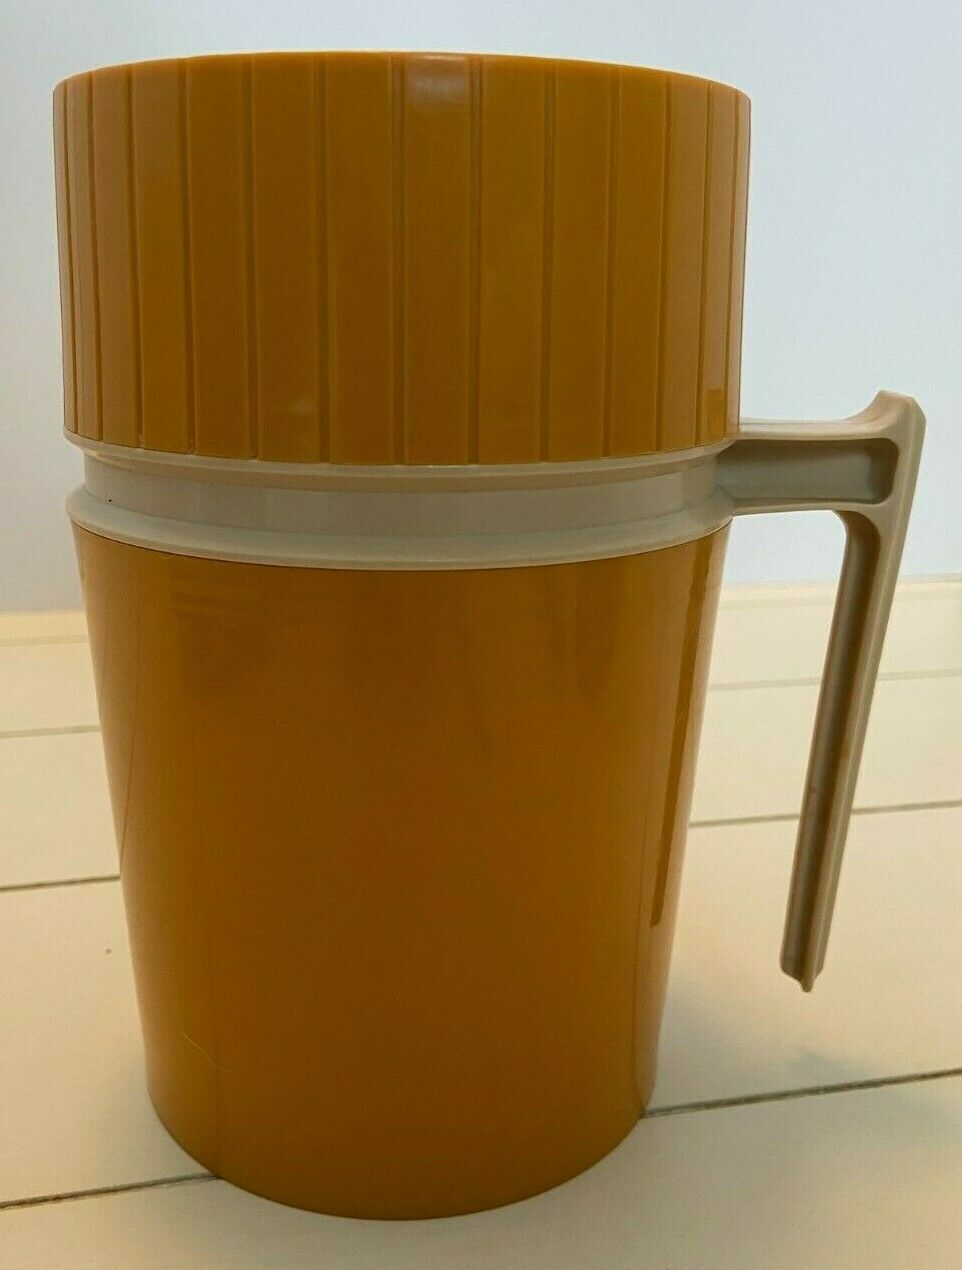 Vintage Thermos Hot or Cold Food Container Gold Model 7002 10 oz. - $14.49